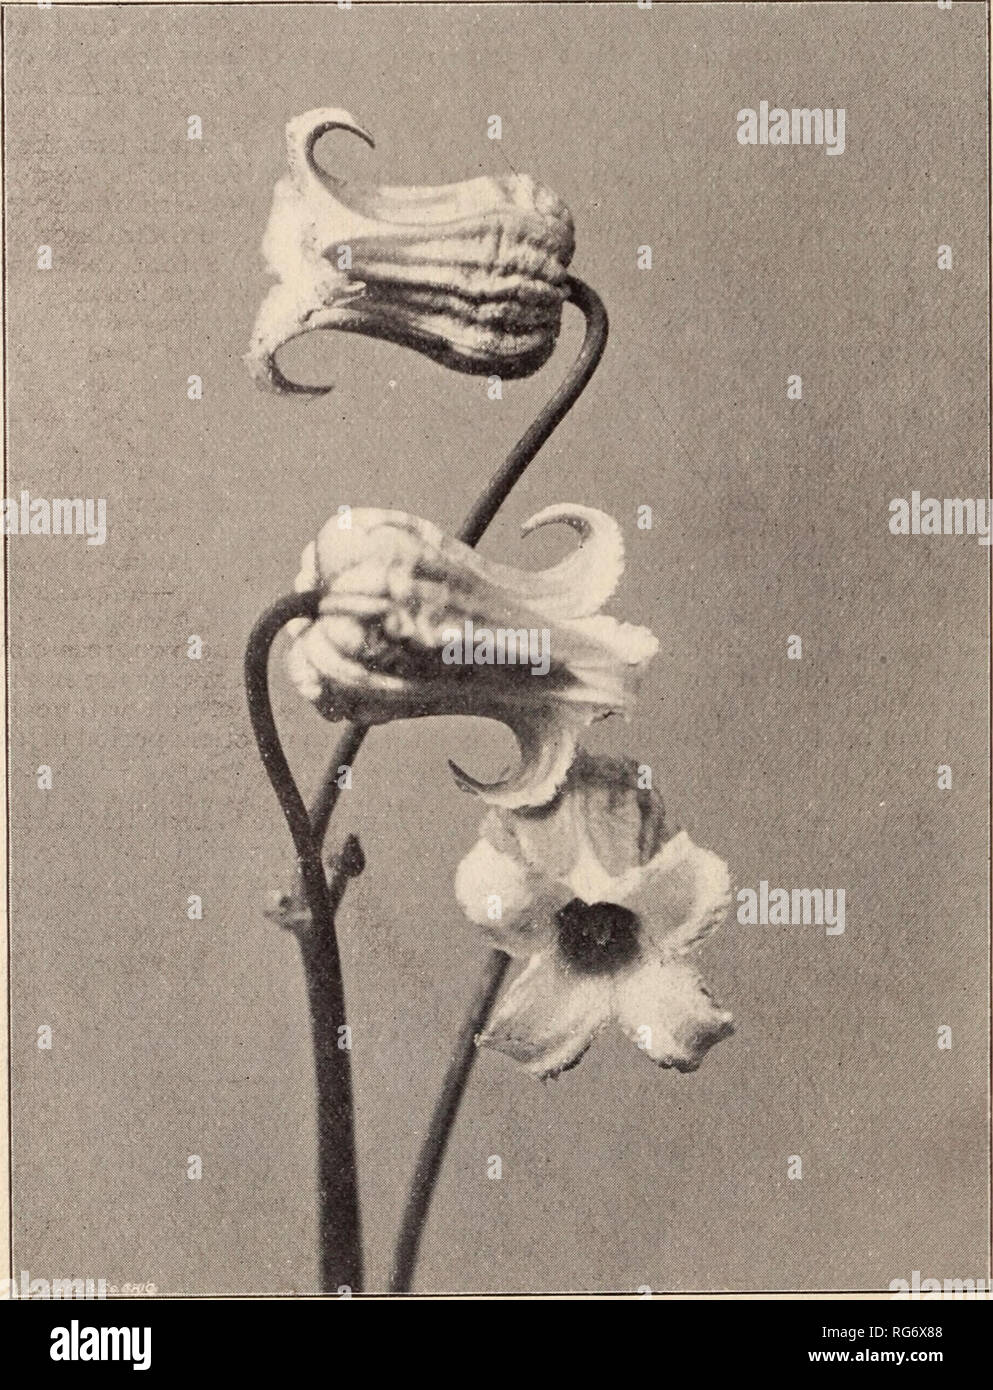 . The Burbank seed book / Luther Burbank Company.. Nursery Catalogue. 22 Clen92vtis. &quot;&quot;^ This season I have the pleasure of offering a Neiv Race of Clematis, pro- duced by crossing the graceful coral-scarlet (Coccinea), and the bell-shaped Crispa (Blue Bells). .«r^)|i.The plants grow almost as vigorously as Hop Vines; the leaves are extremely gracile and handsome, and the profusion of flowers—from June till frost—exquisite in form and color, most of them being rather broadly bell- shaped, with an exquisitely beautiful frosty or snowfiake appearance, with a blending of colors and shad Stock Photo